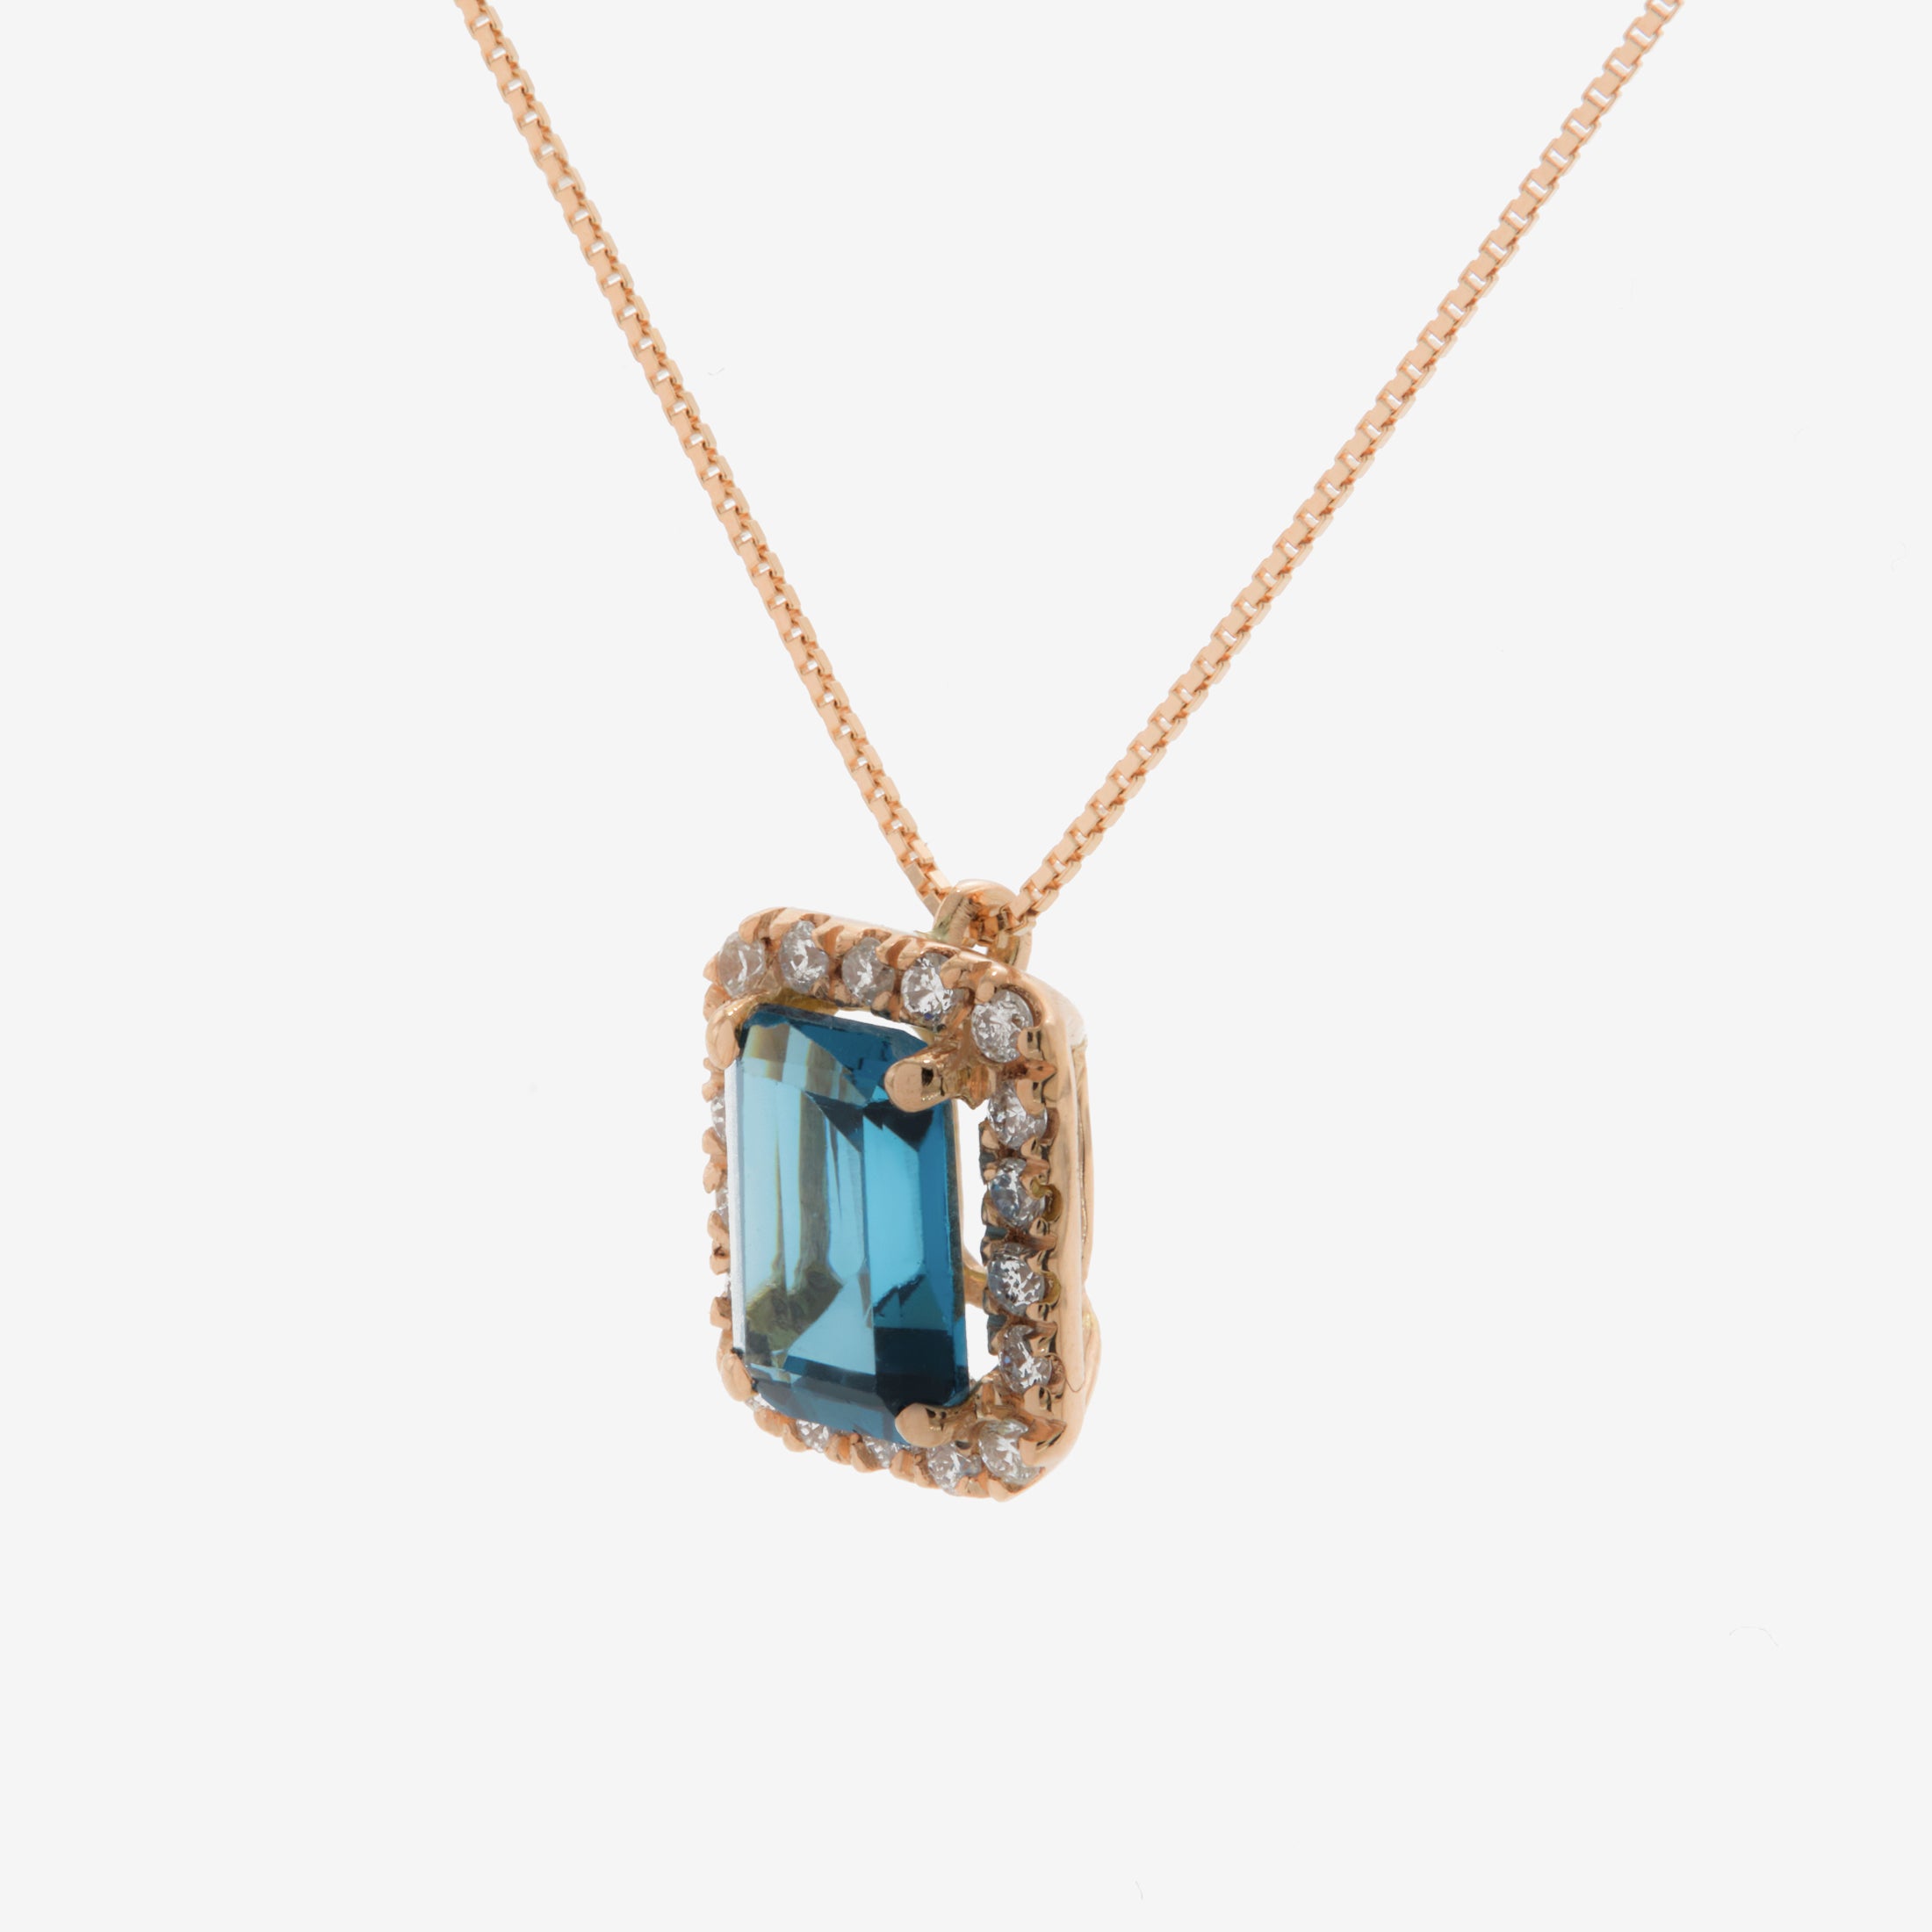 Rose gold necklace with blue topaz and diamonds